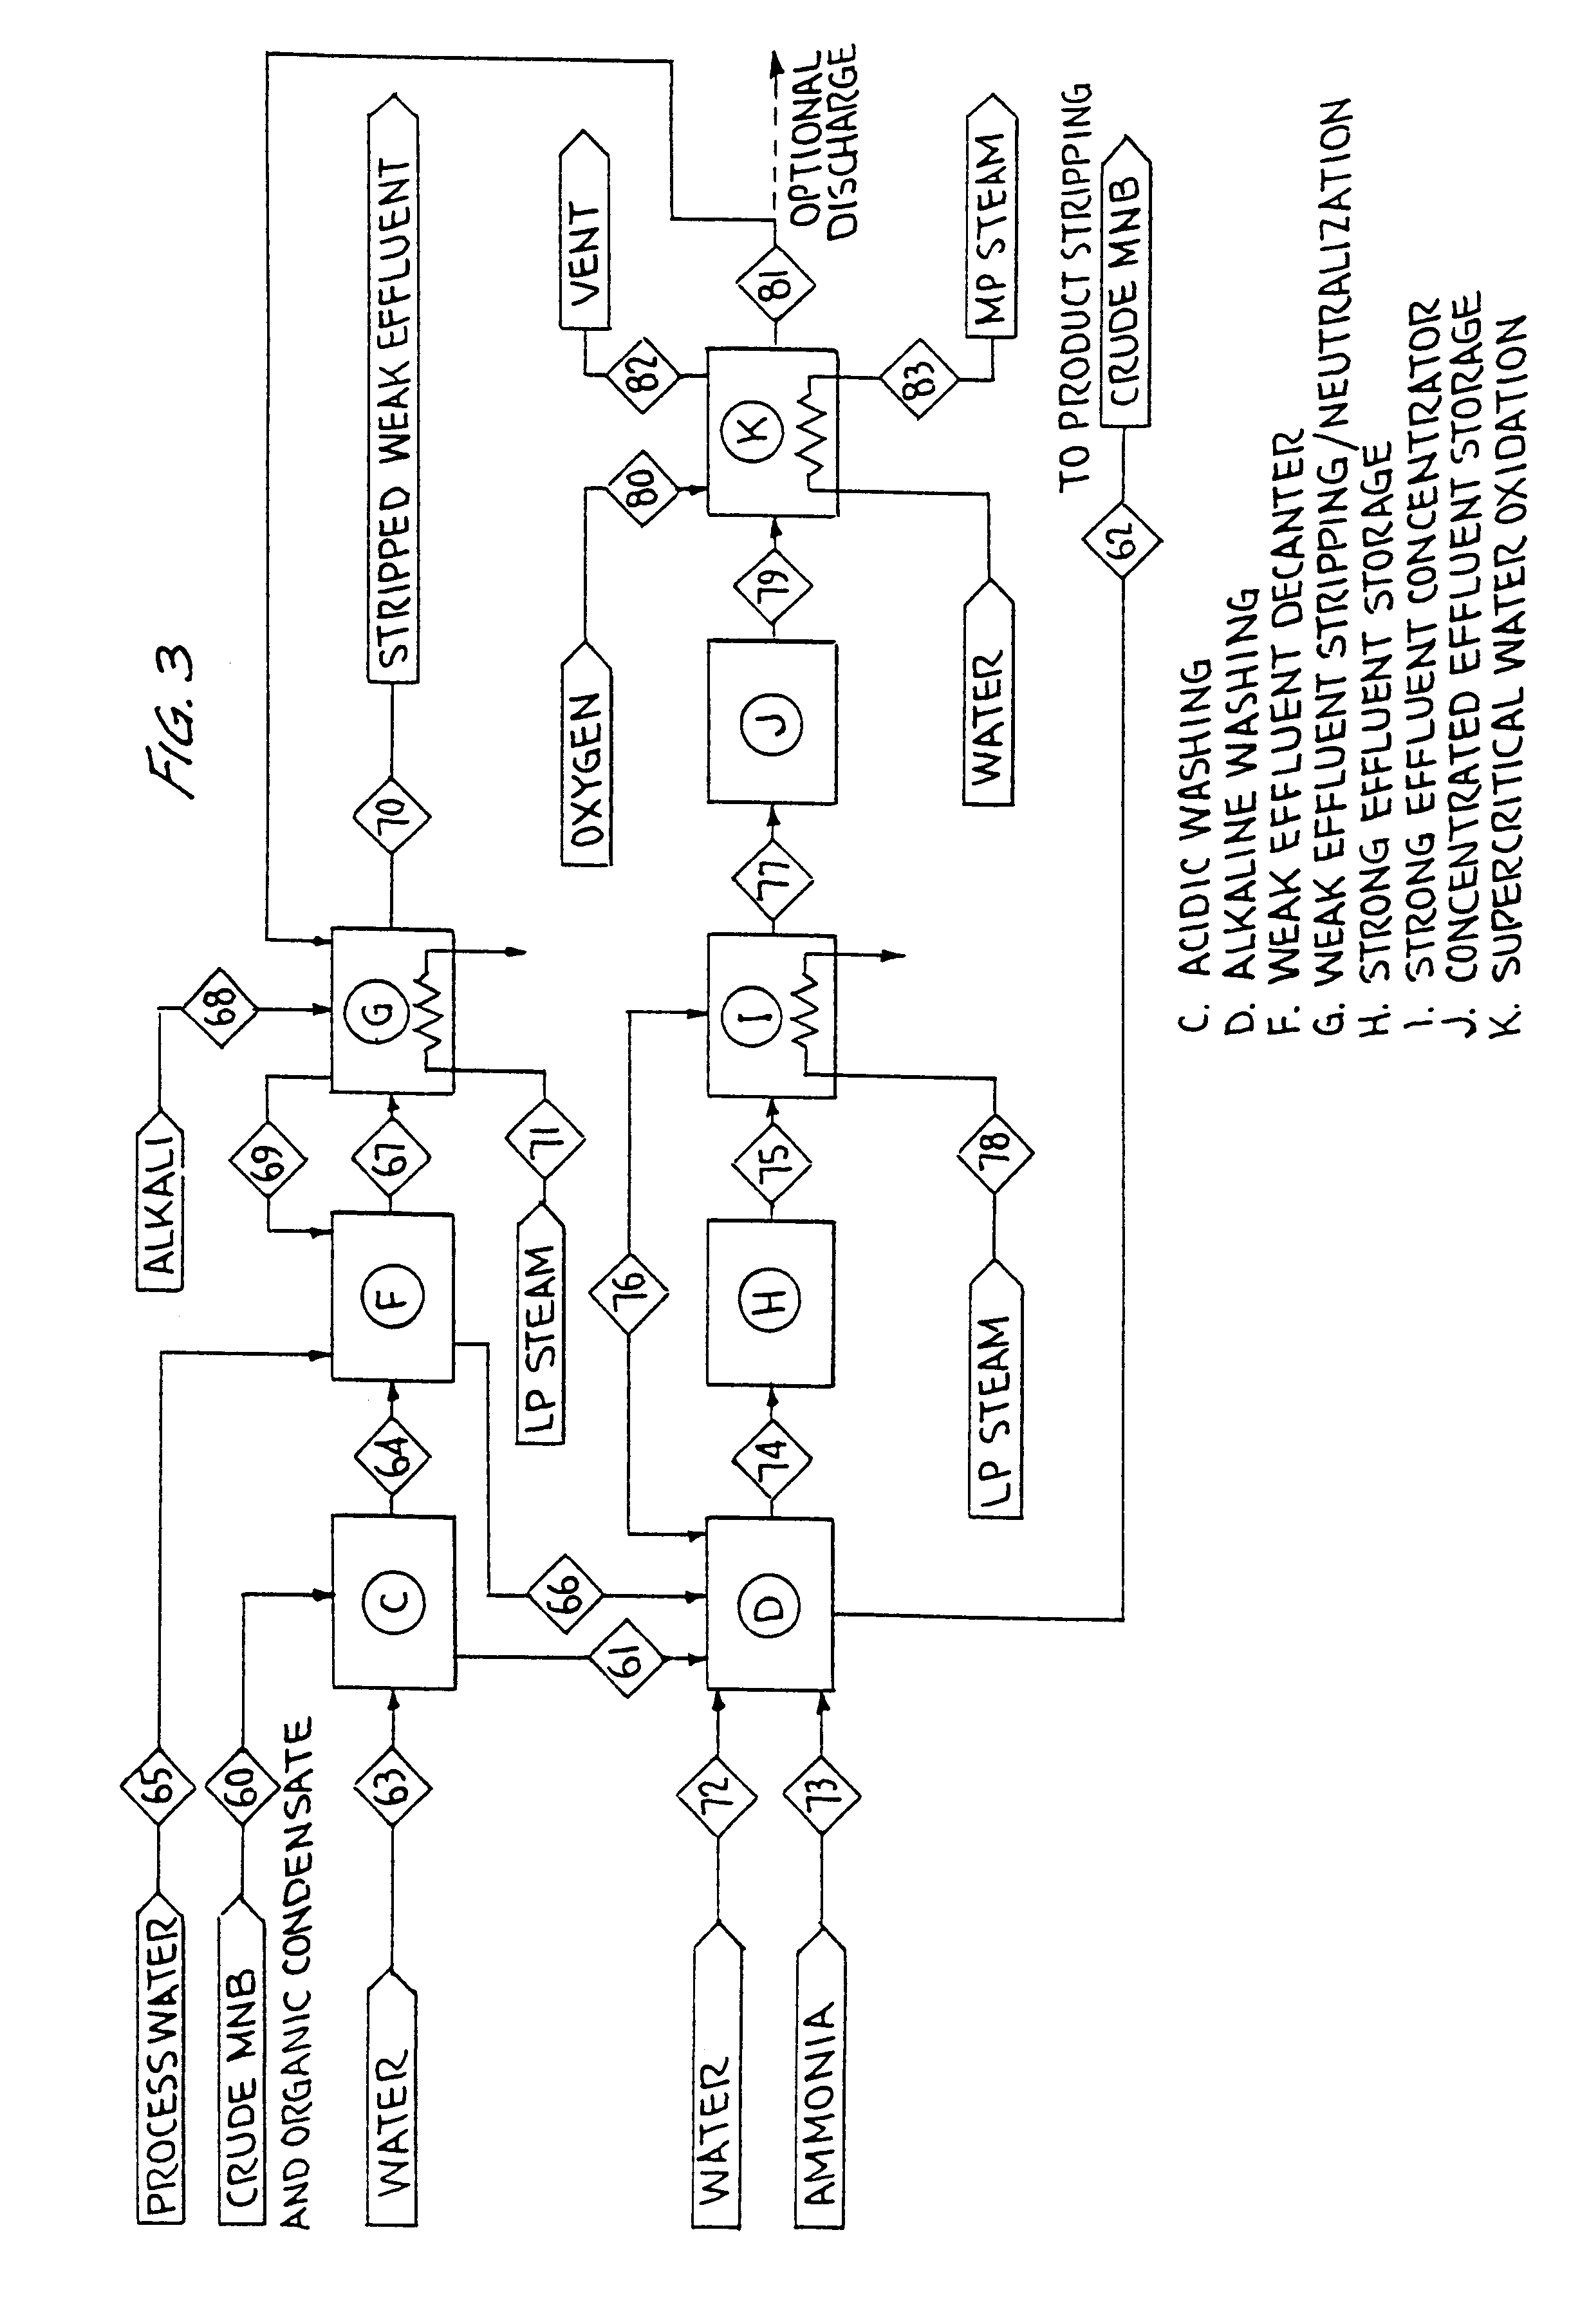 Integrated effluent treatment process for nitroaromatic manufacture